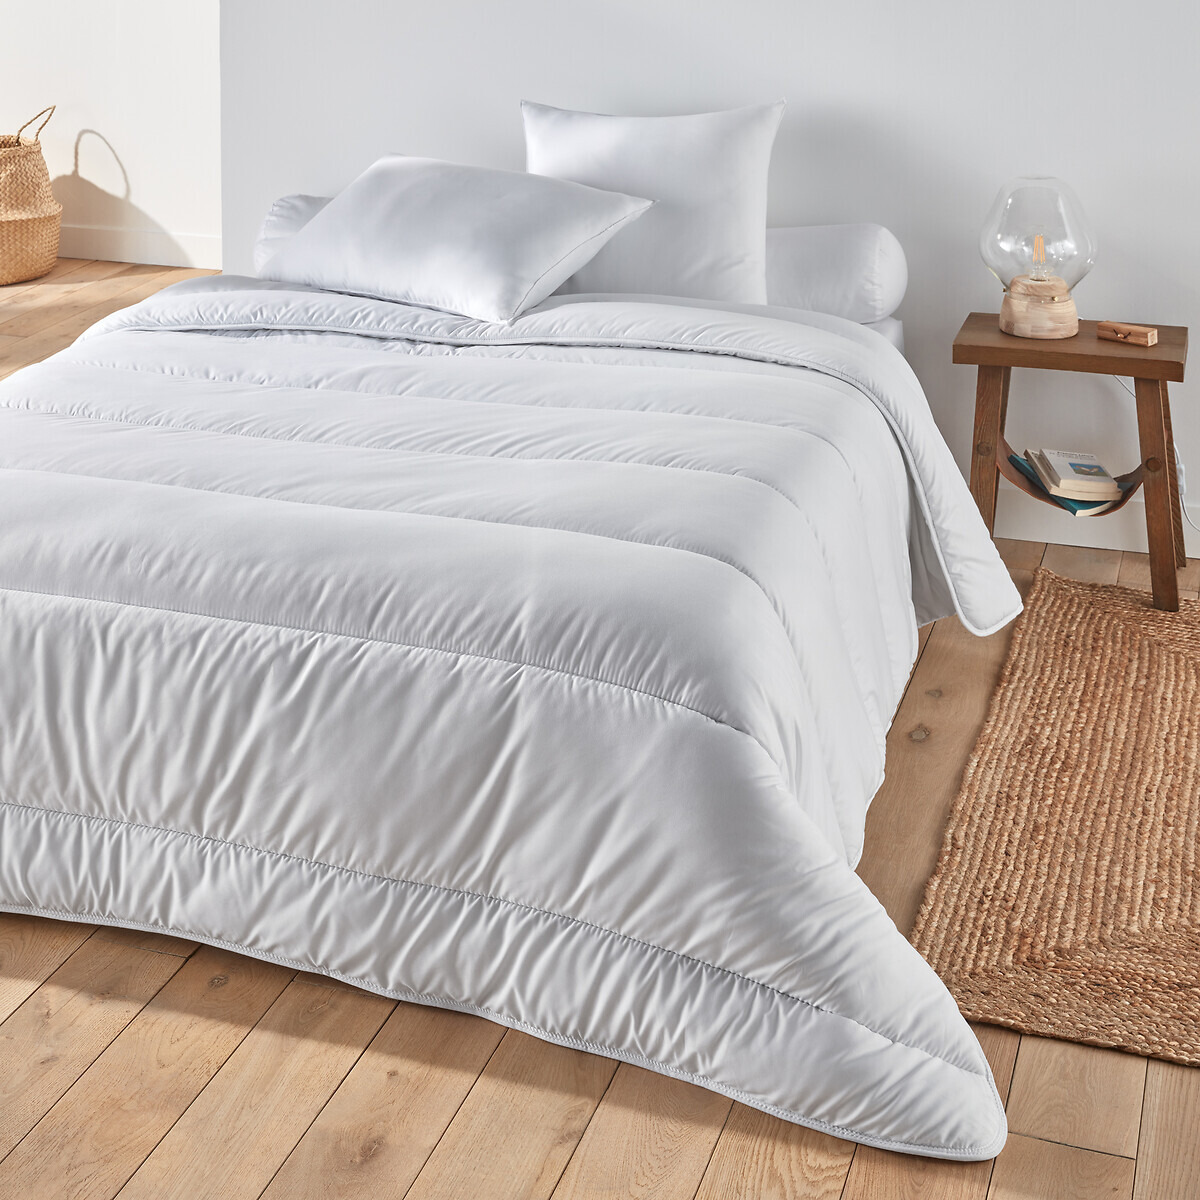 Anti Dust Mite Synthetic Summer Duvet - image 1